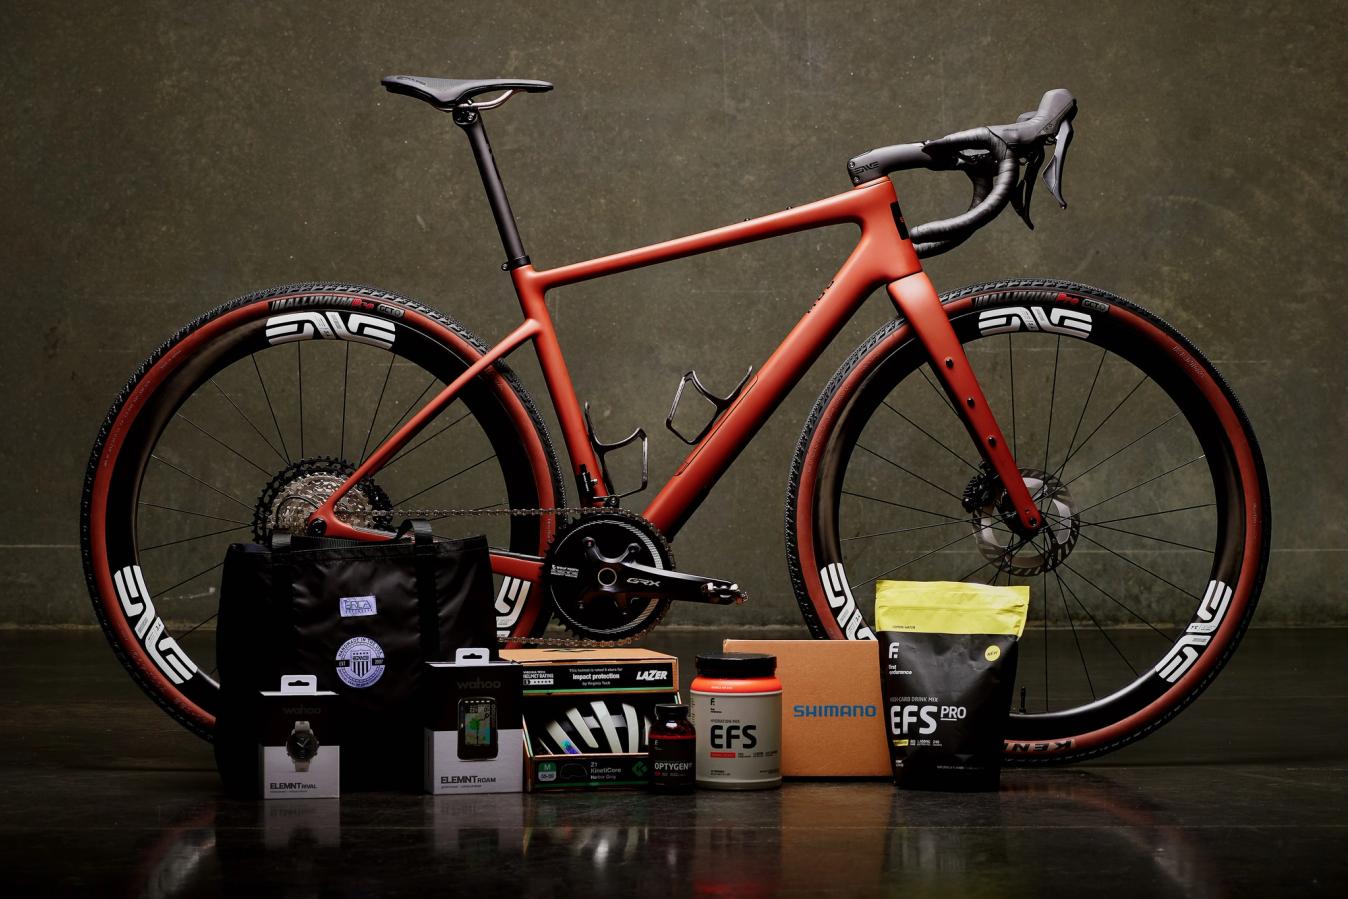 The collection of sponsored good that the two riders will be using for the 2024 season